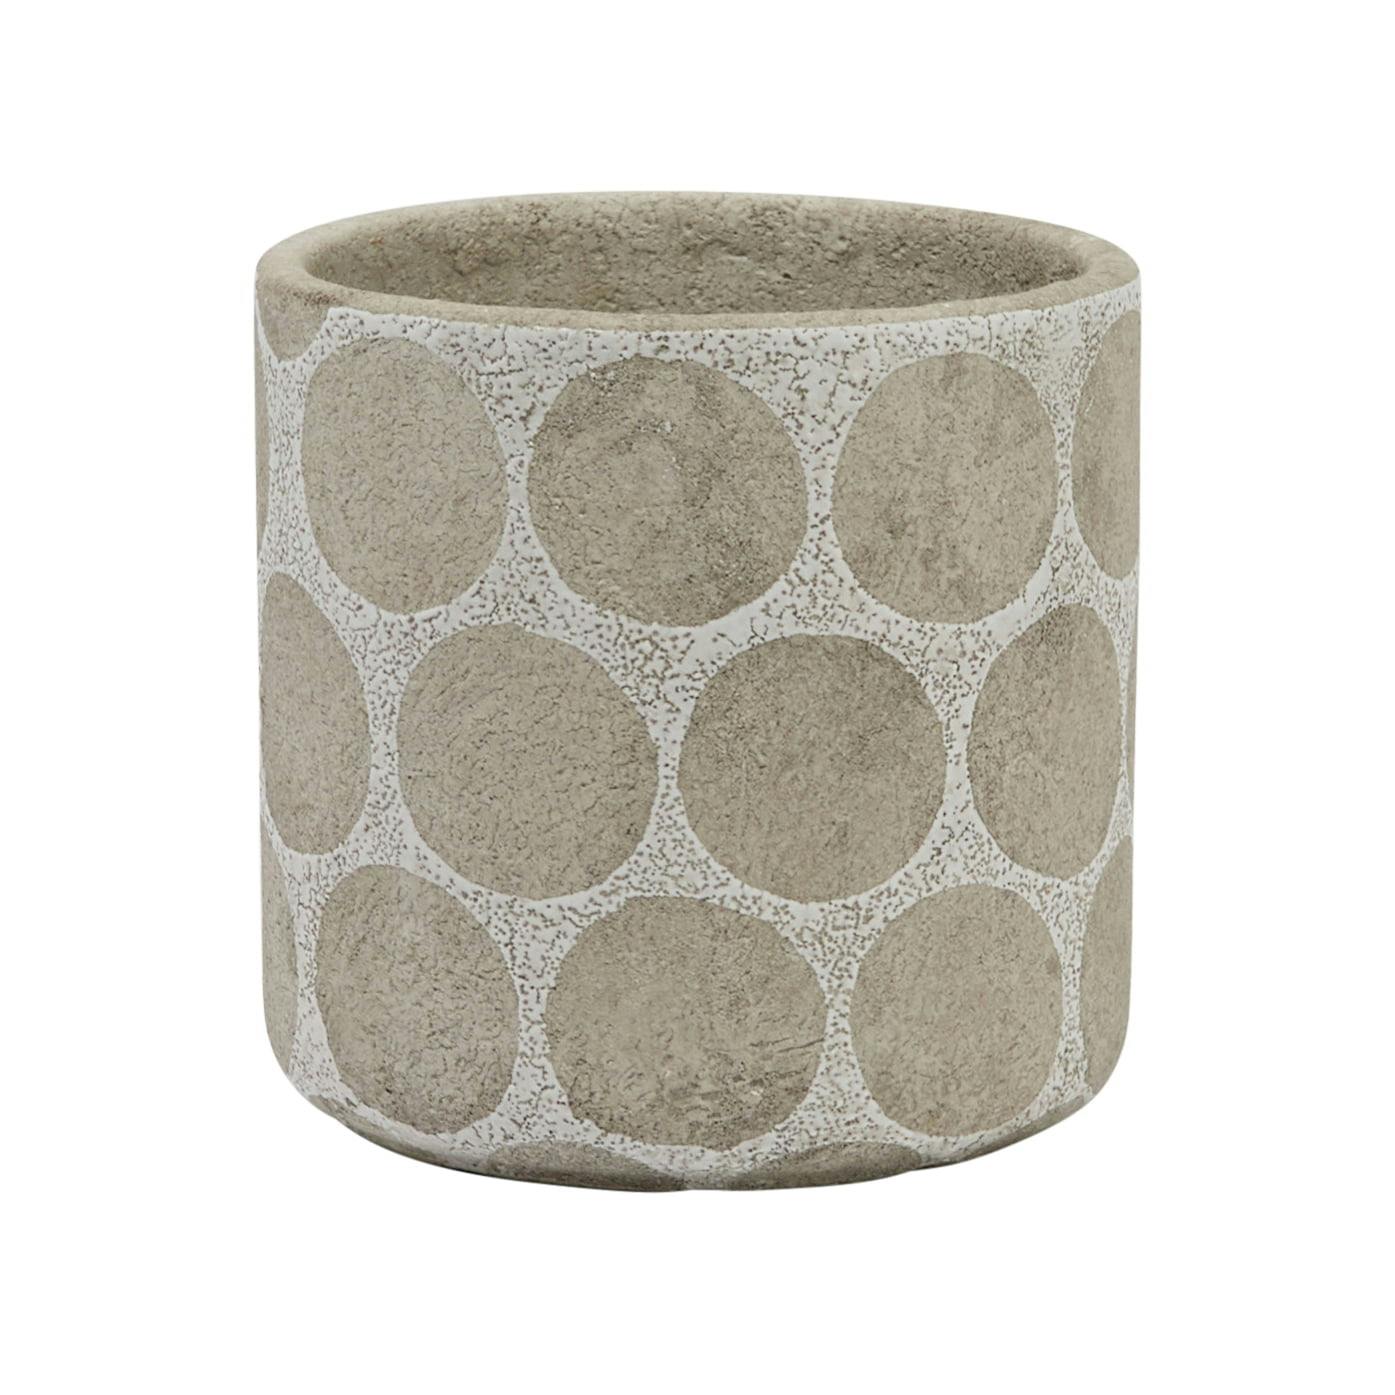 Sleek Terra-cotta Round Planter with Wax Relief Dots, White and Cement